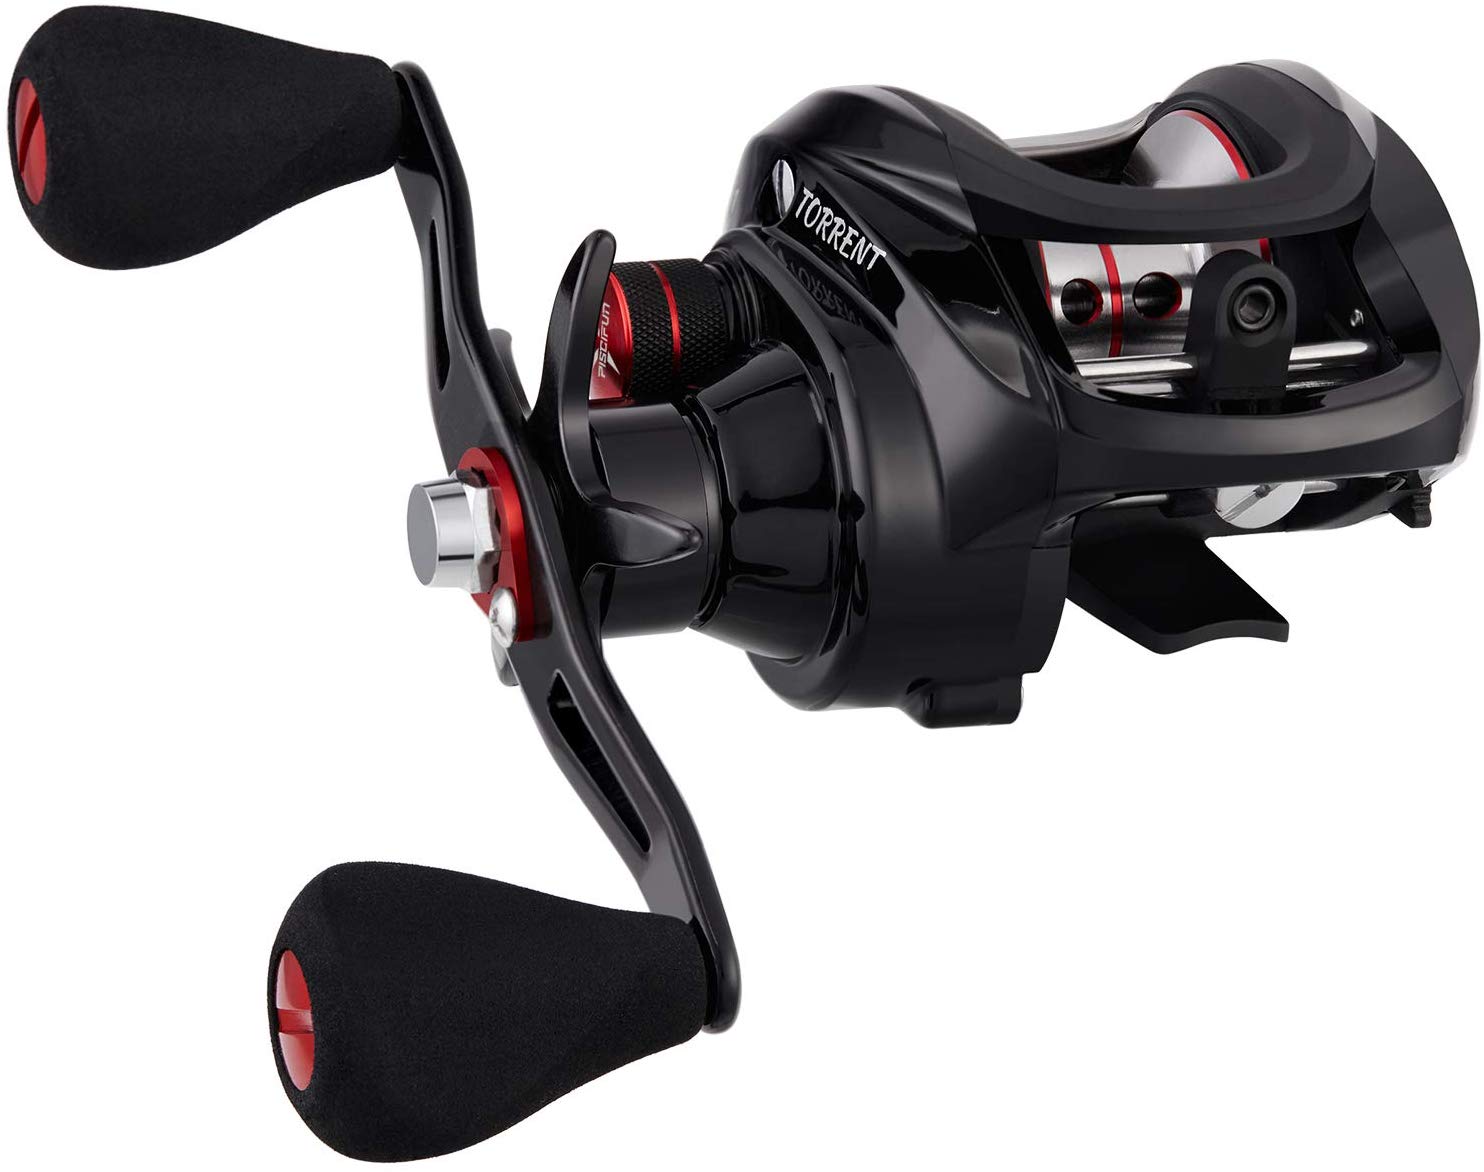 How to Cast a Baitcaster Reel FAR - Proper Reel Tuning - KastKing